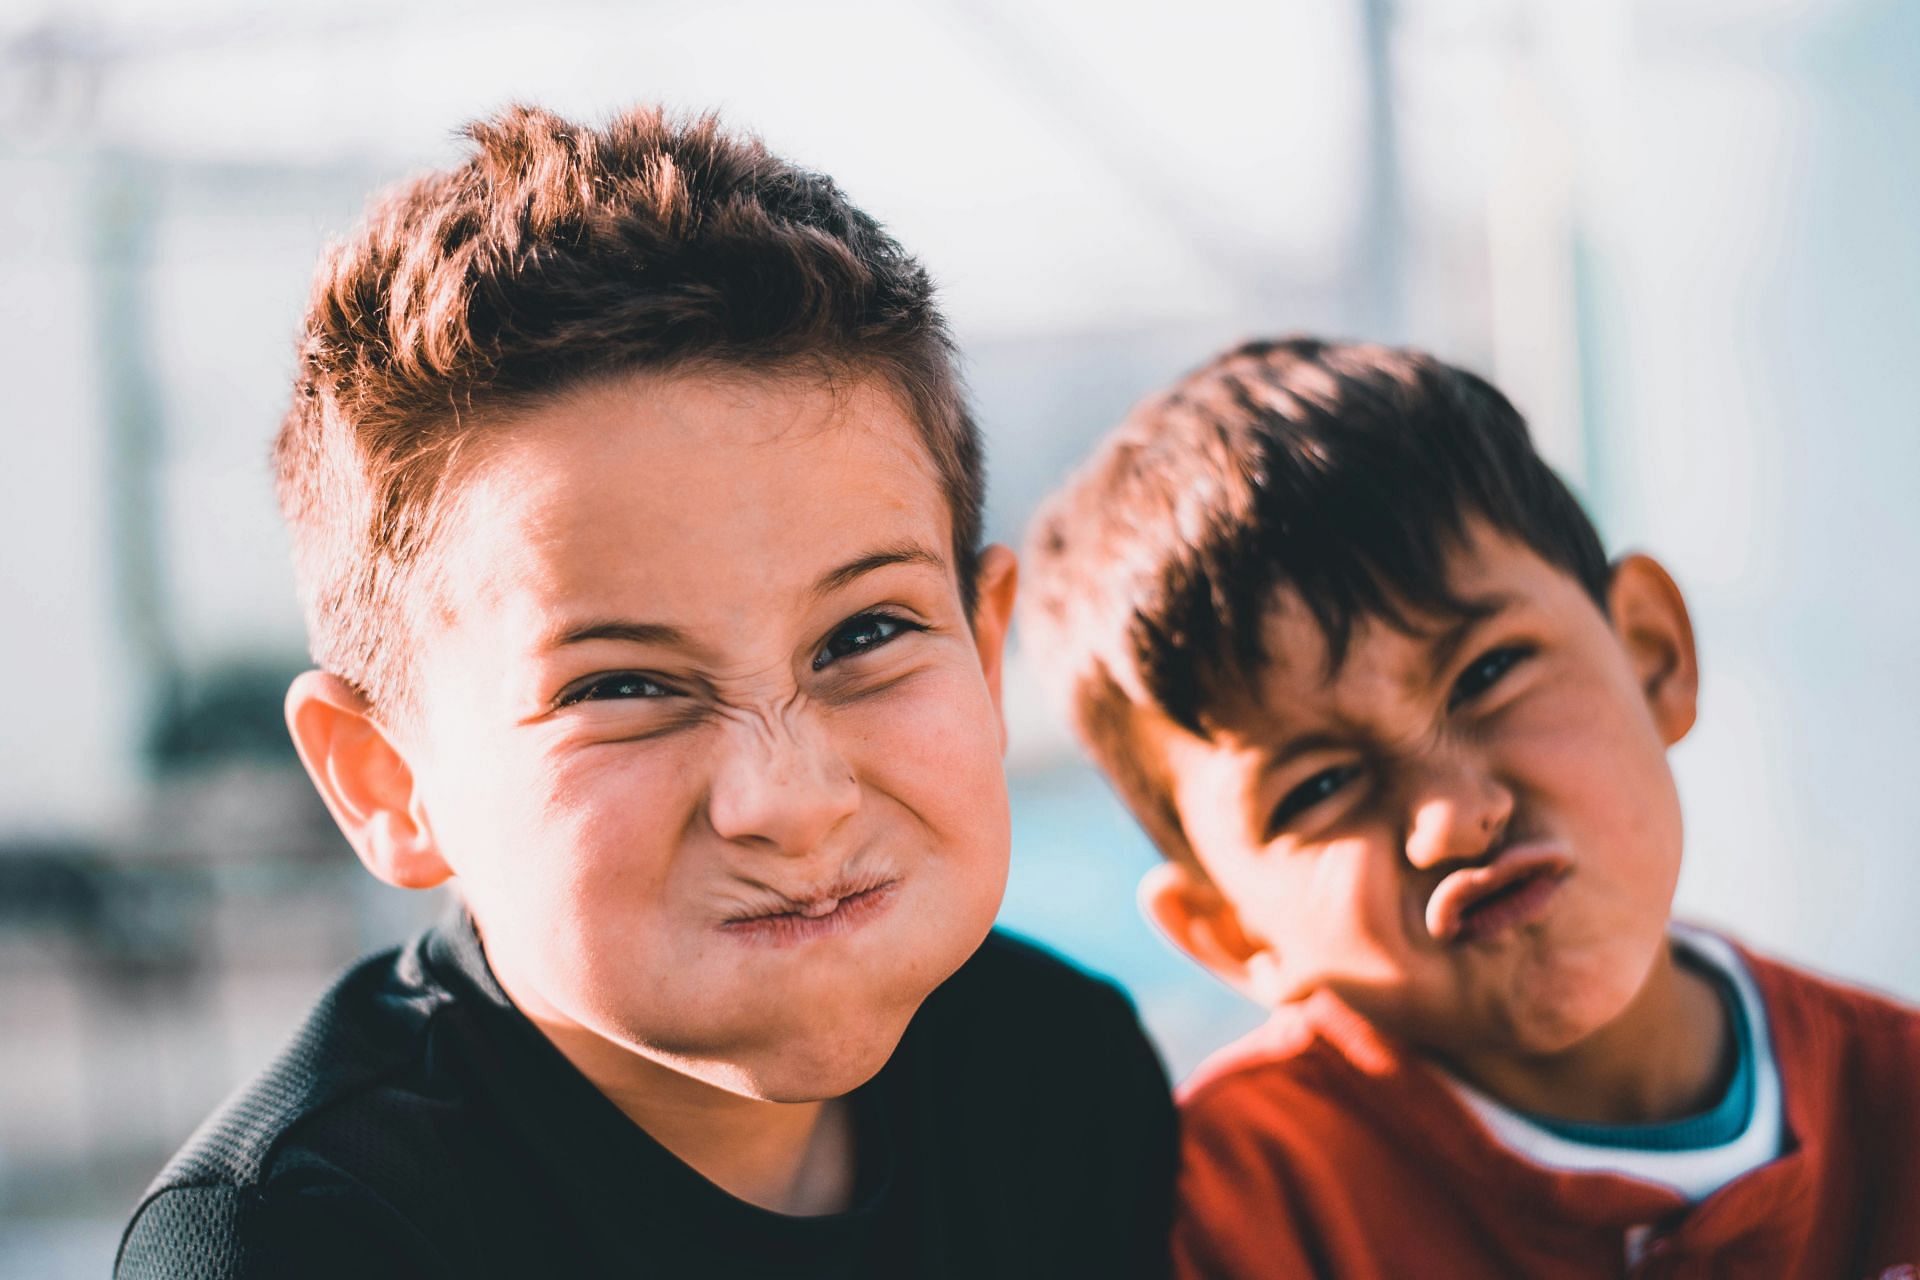 Breathing exercises for kids for health and fun (Image by Austin Pacheco/Unsplash)